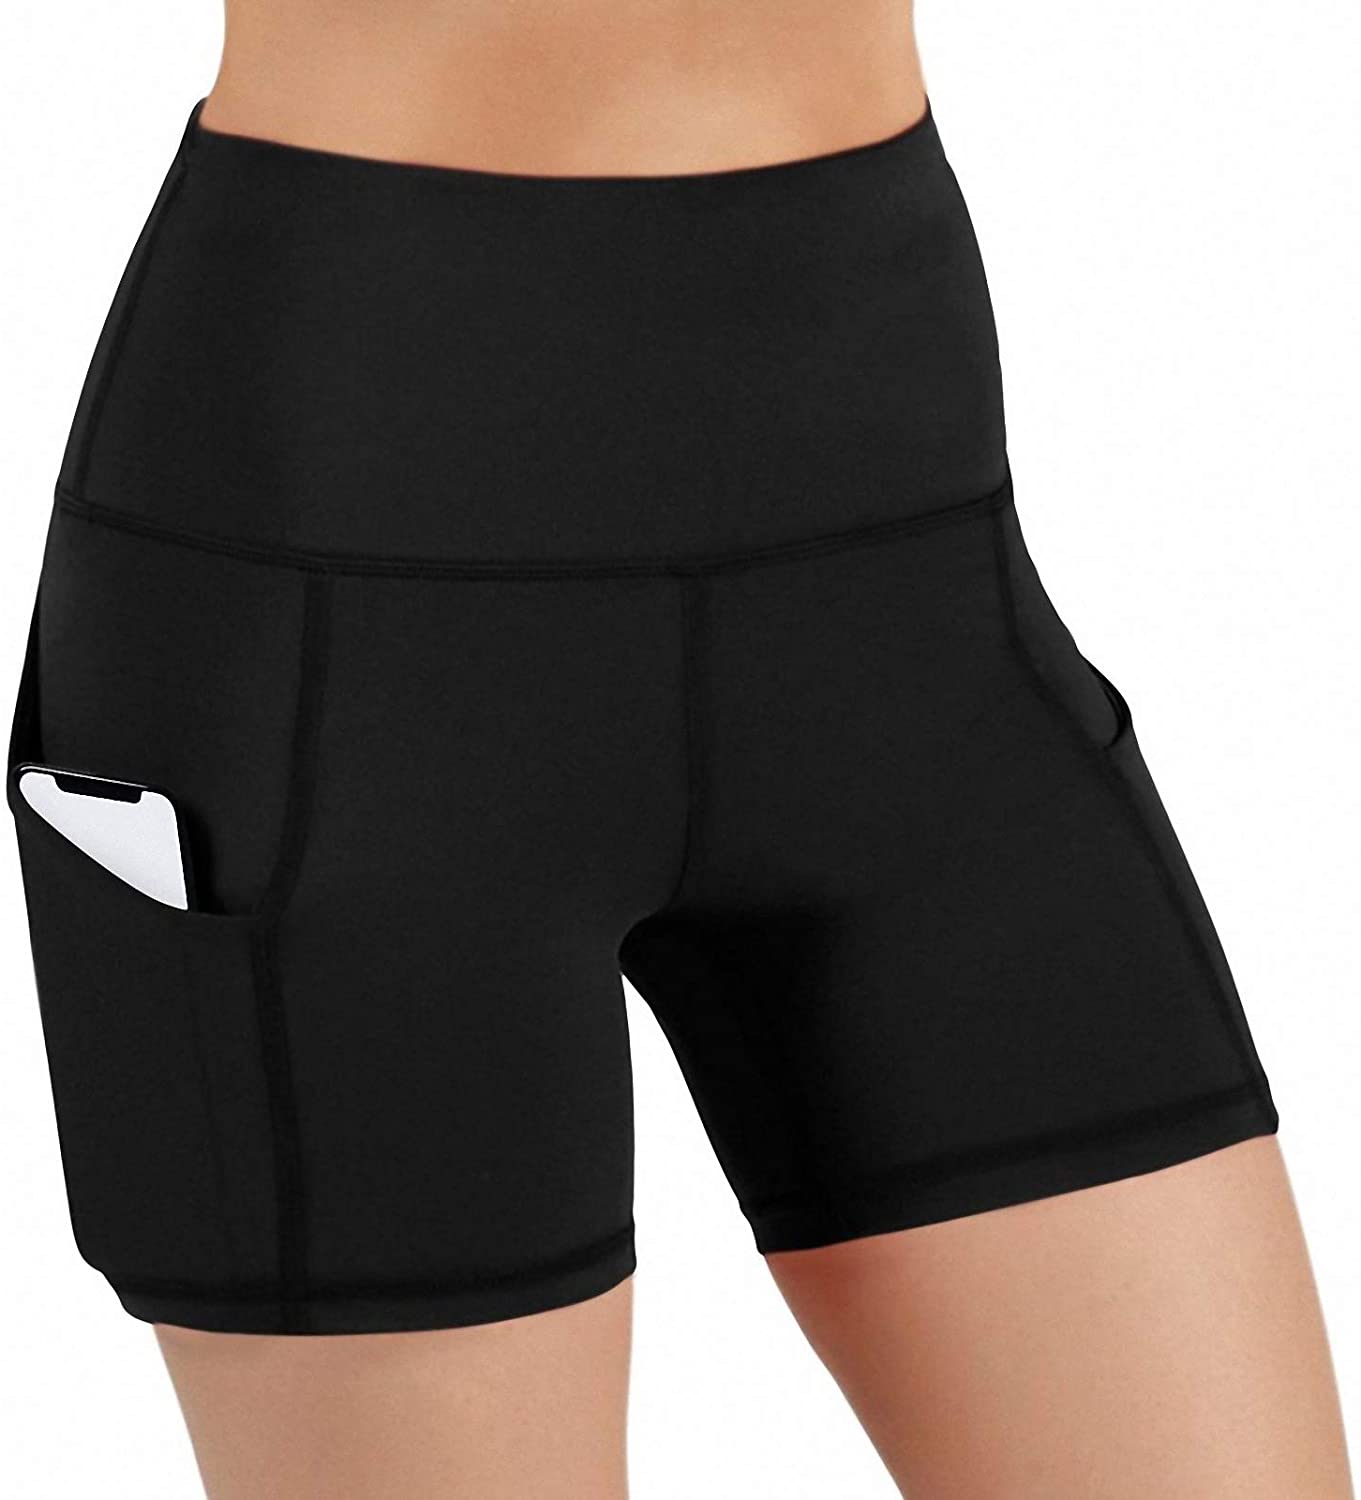 LOVESOFT Women's Workout Cycling Running Tights Yoga Shorts with Side Pockets 